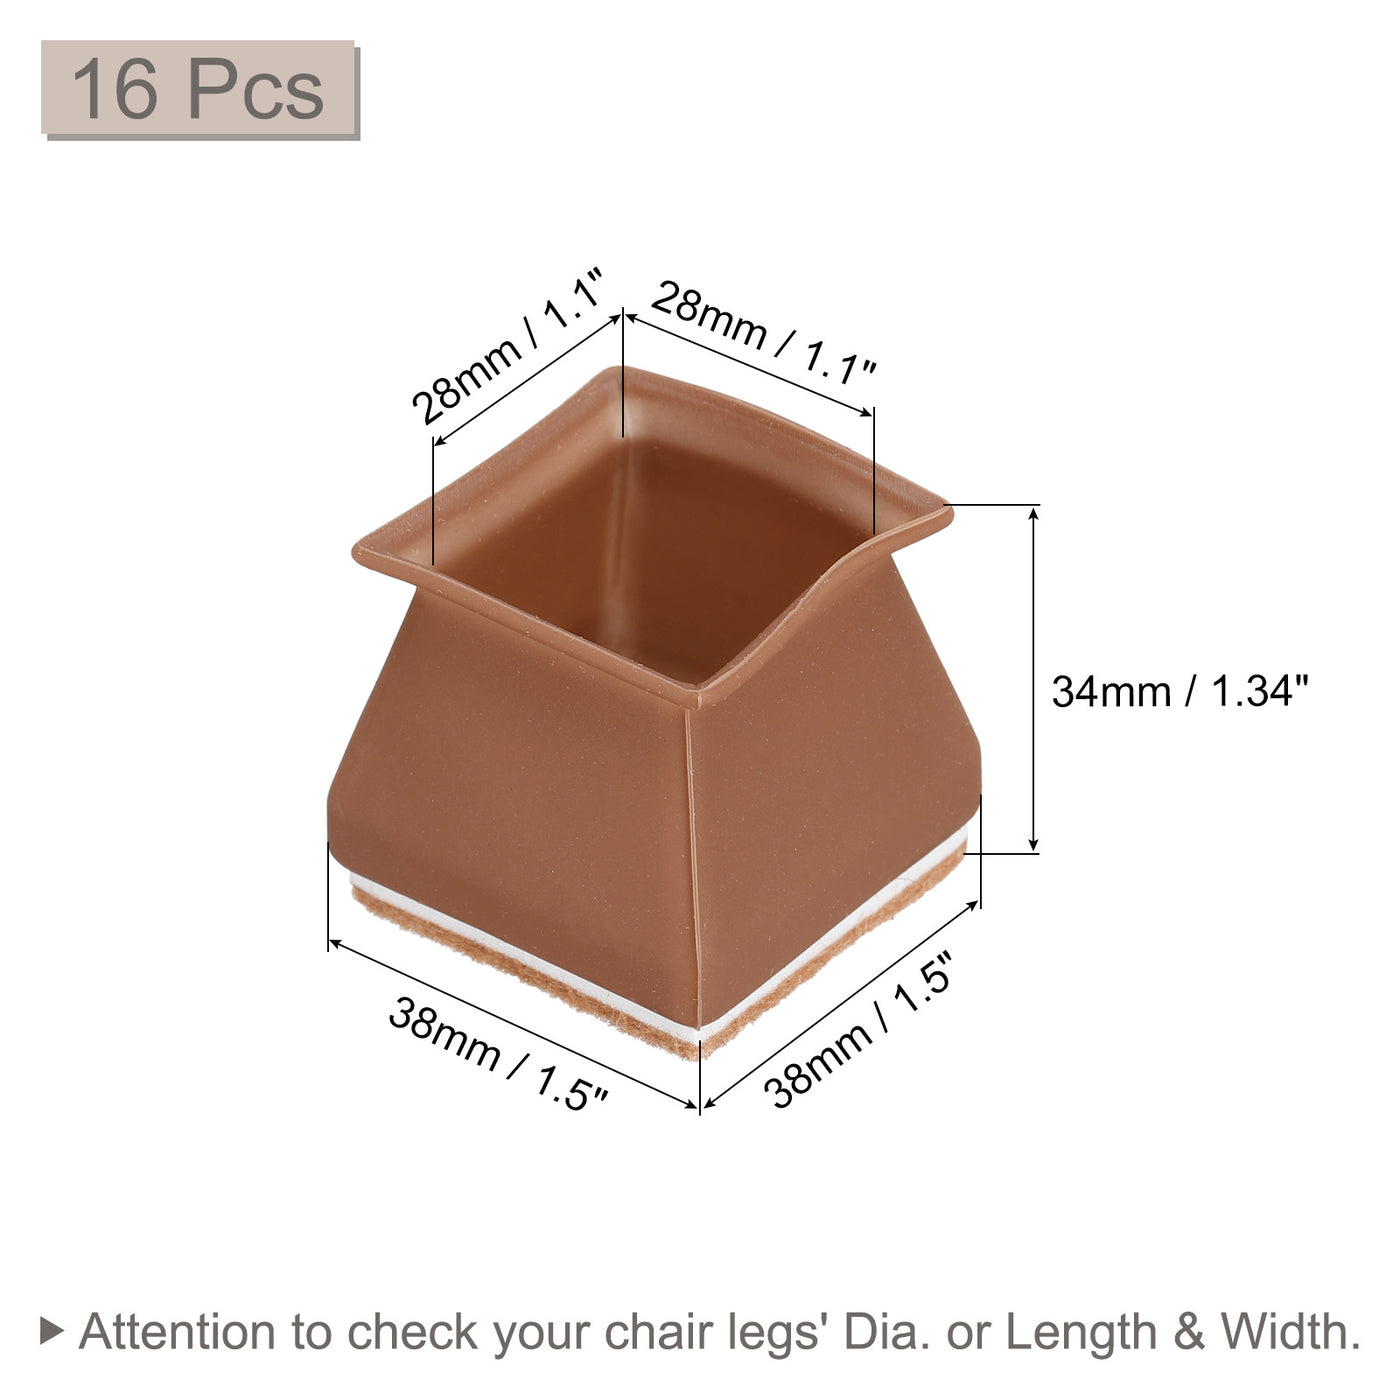 uxcell Uxcell Chair Leg Floor Protectors, 16Pcs 28mm(1.1") Square Silicone & Felt Chair Leg Cover Caps for Hardwood Floors (Coffee)